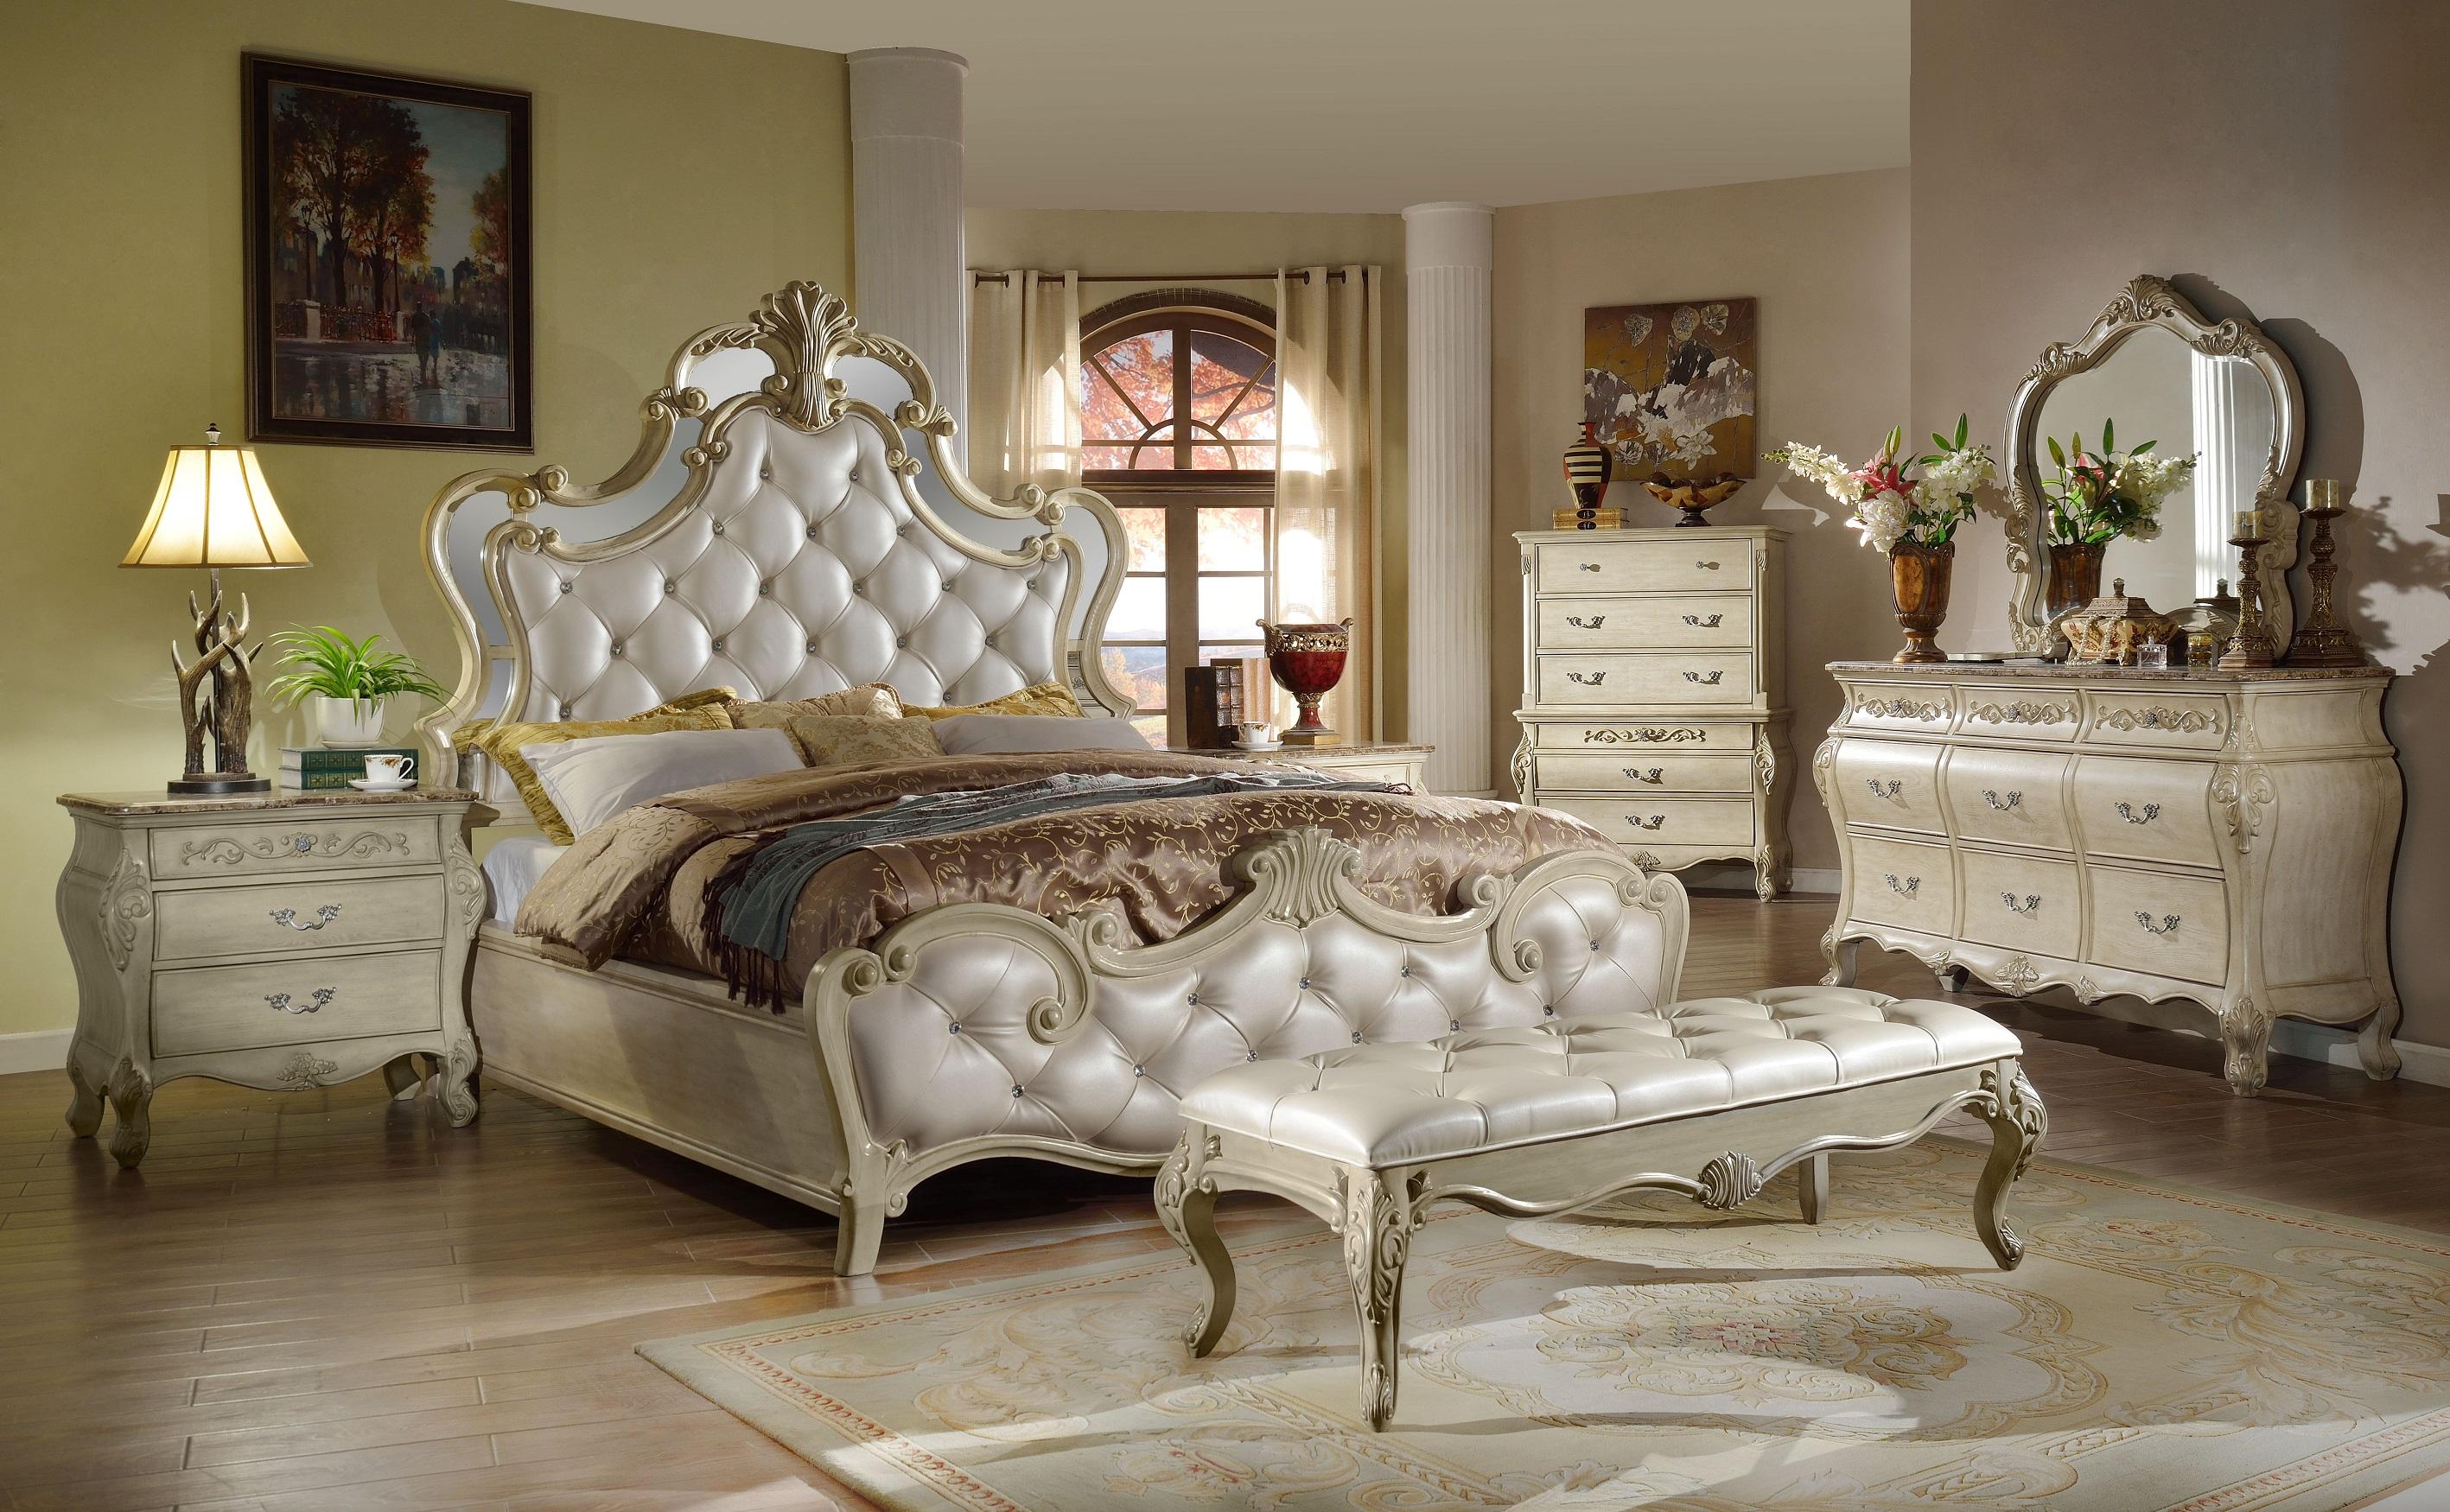 

    
McFerran B8305 Antique White Glamour Crystal Tufted Fabric Queen Bedroom Set 7Pcs
